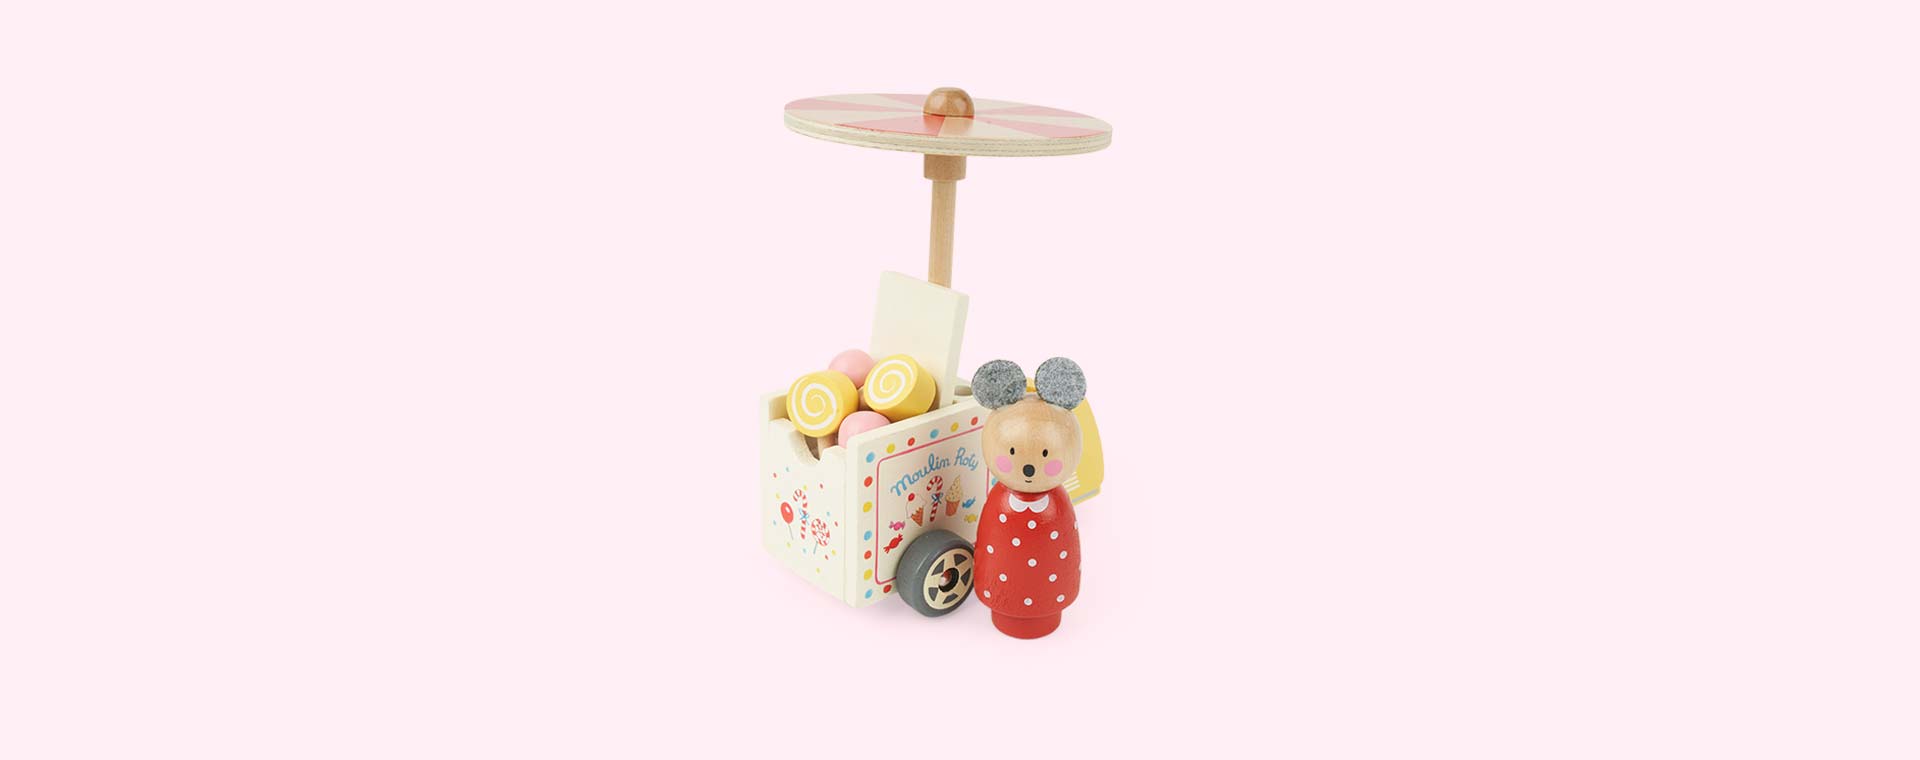 Multi Moulin Roty Ice Cream Delivery Tricycle